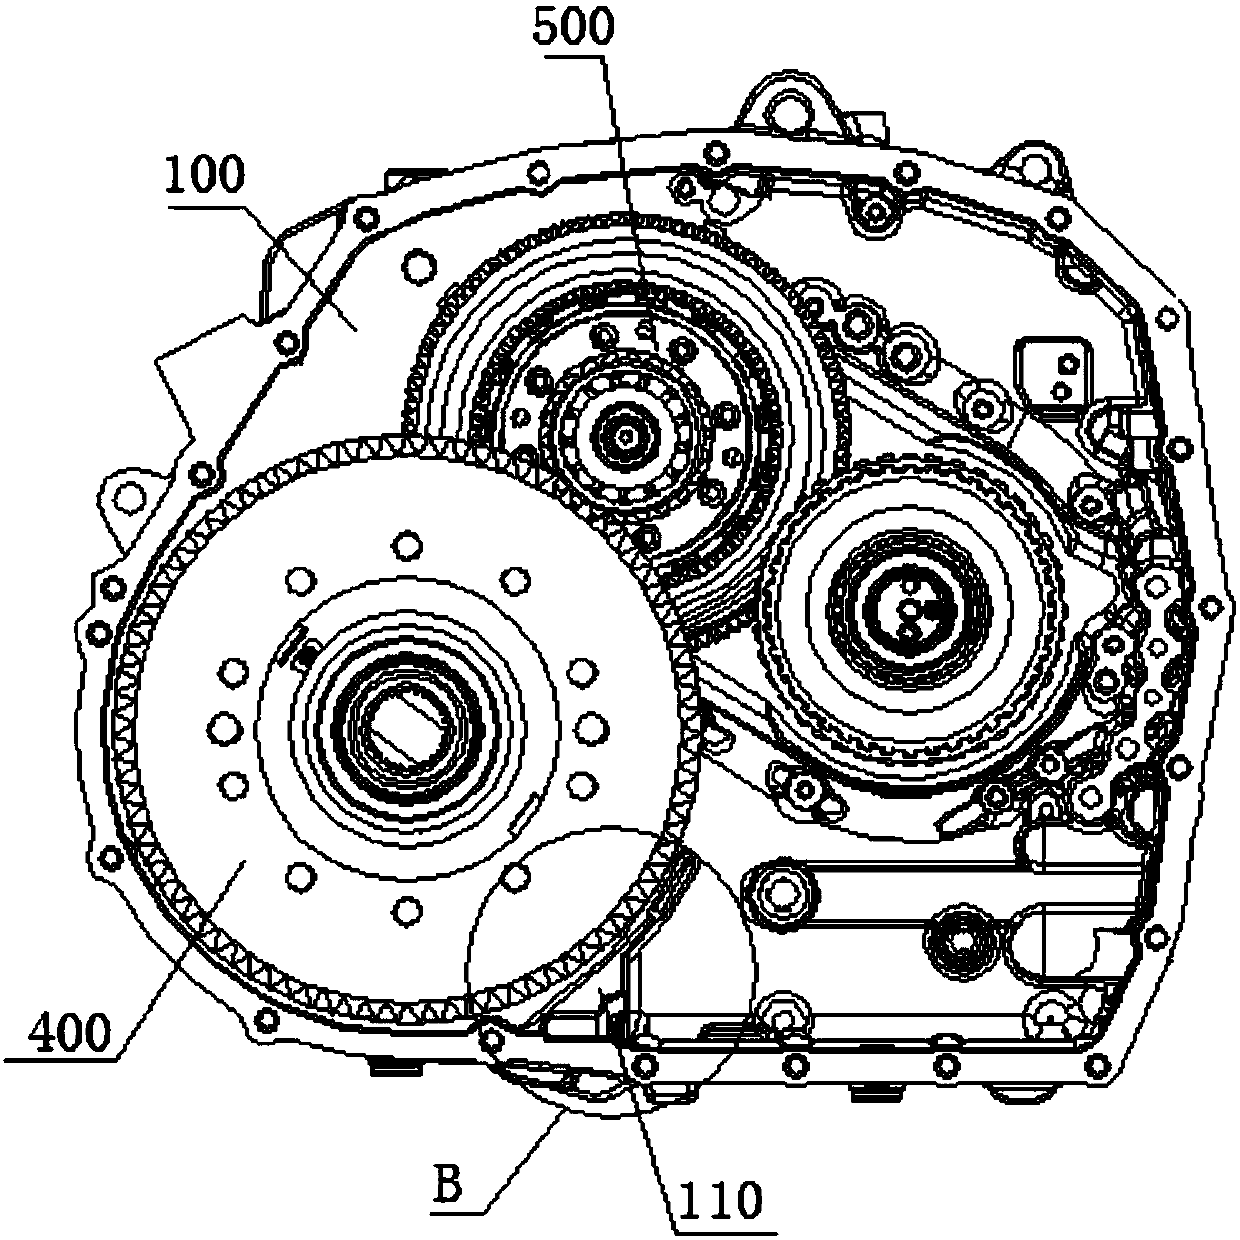 Transmission and automobile